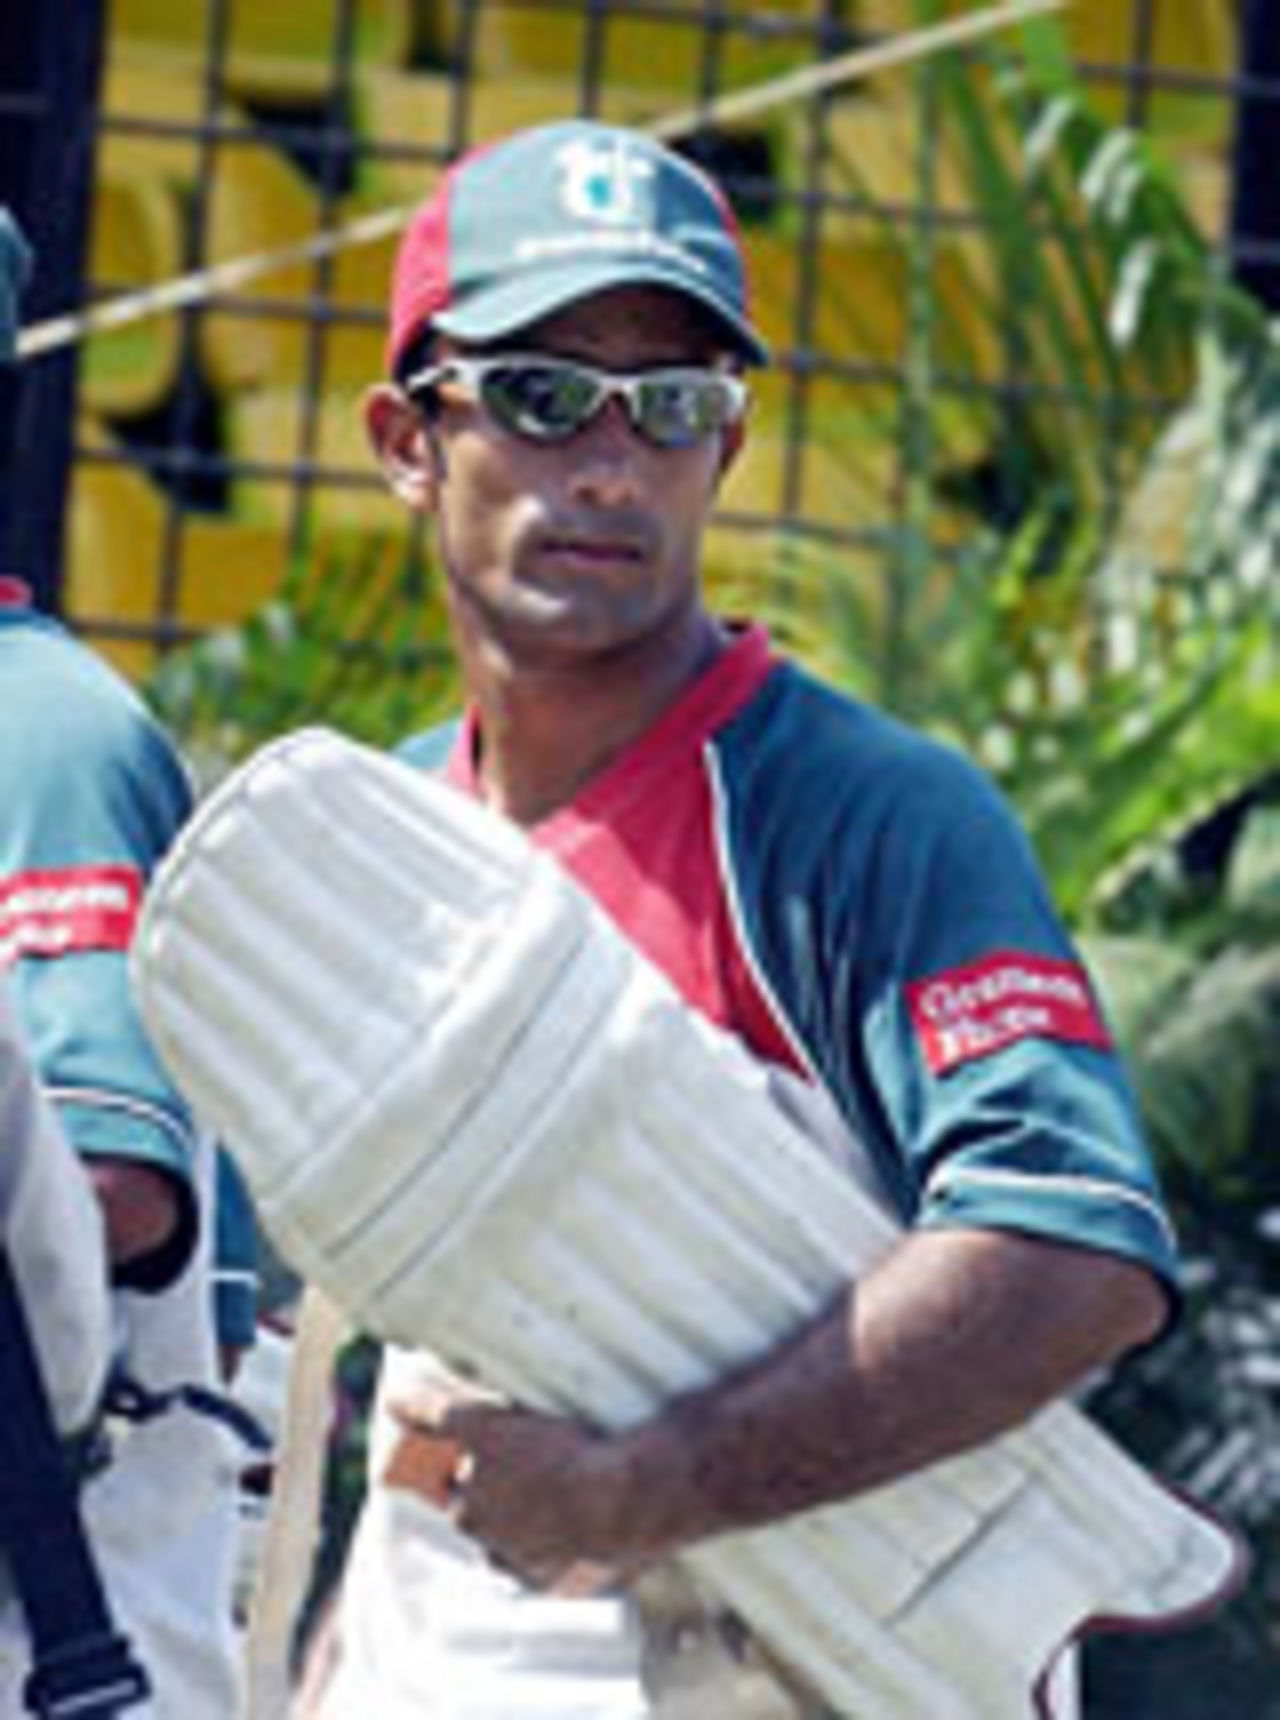 Khaled Mashud at net practice before the First Test against New Zealand